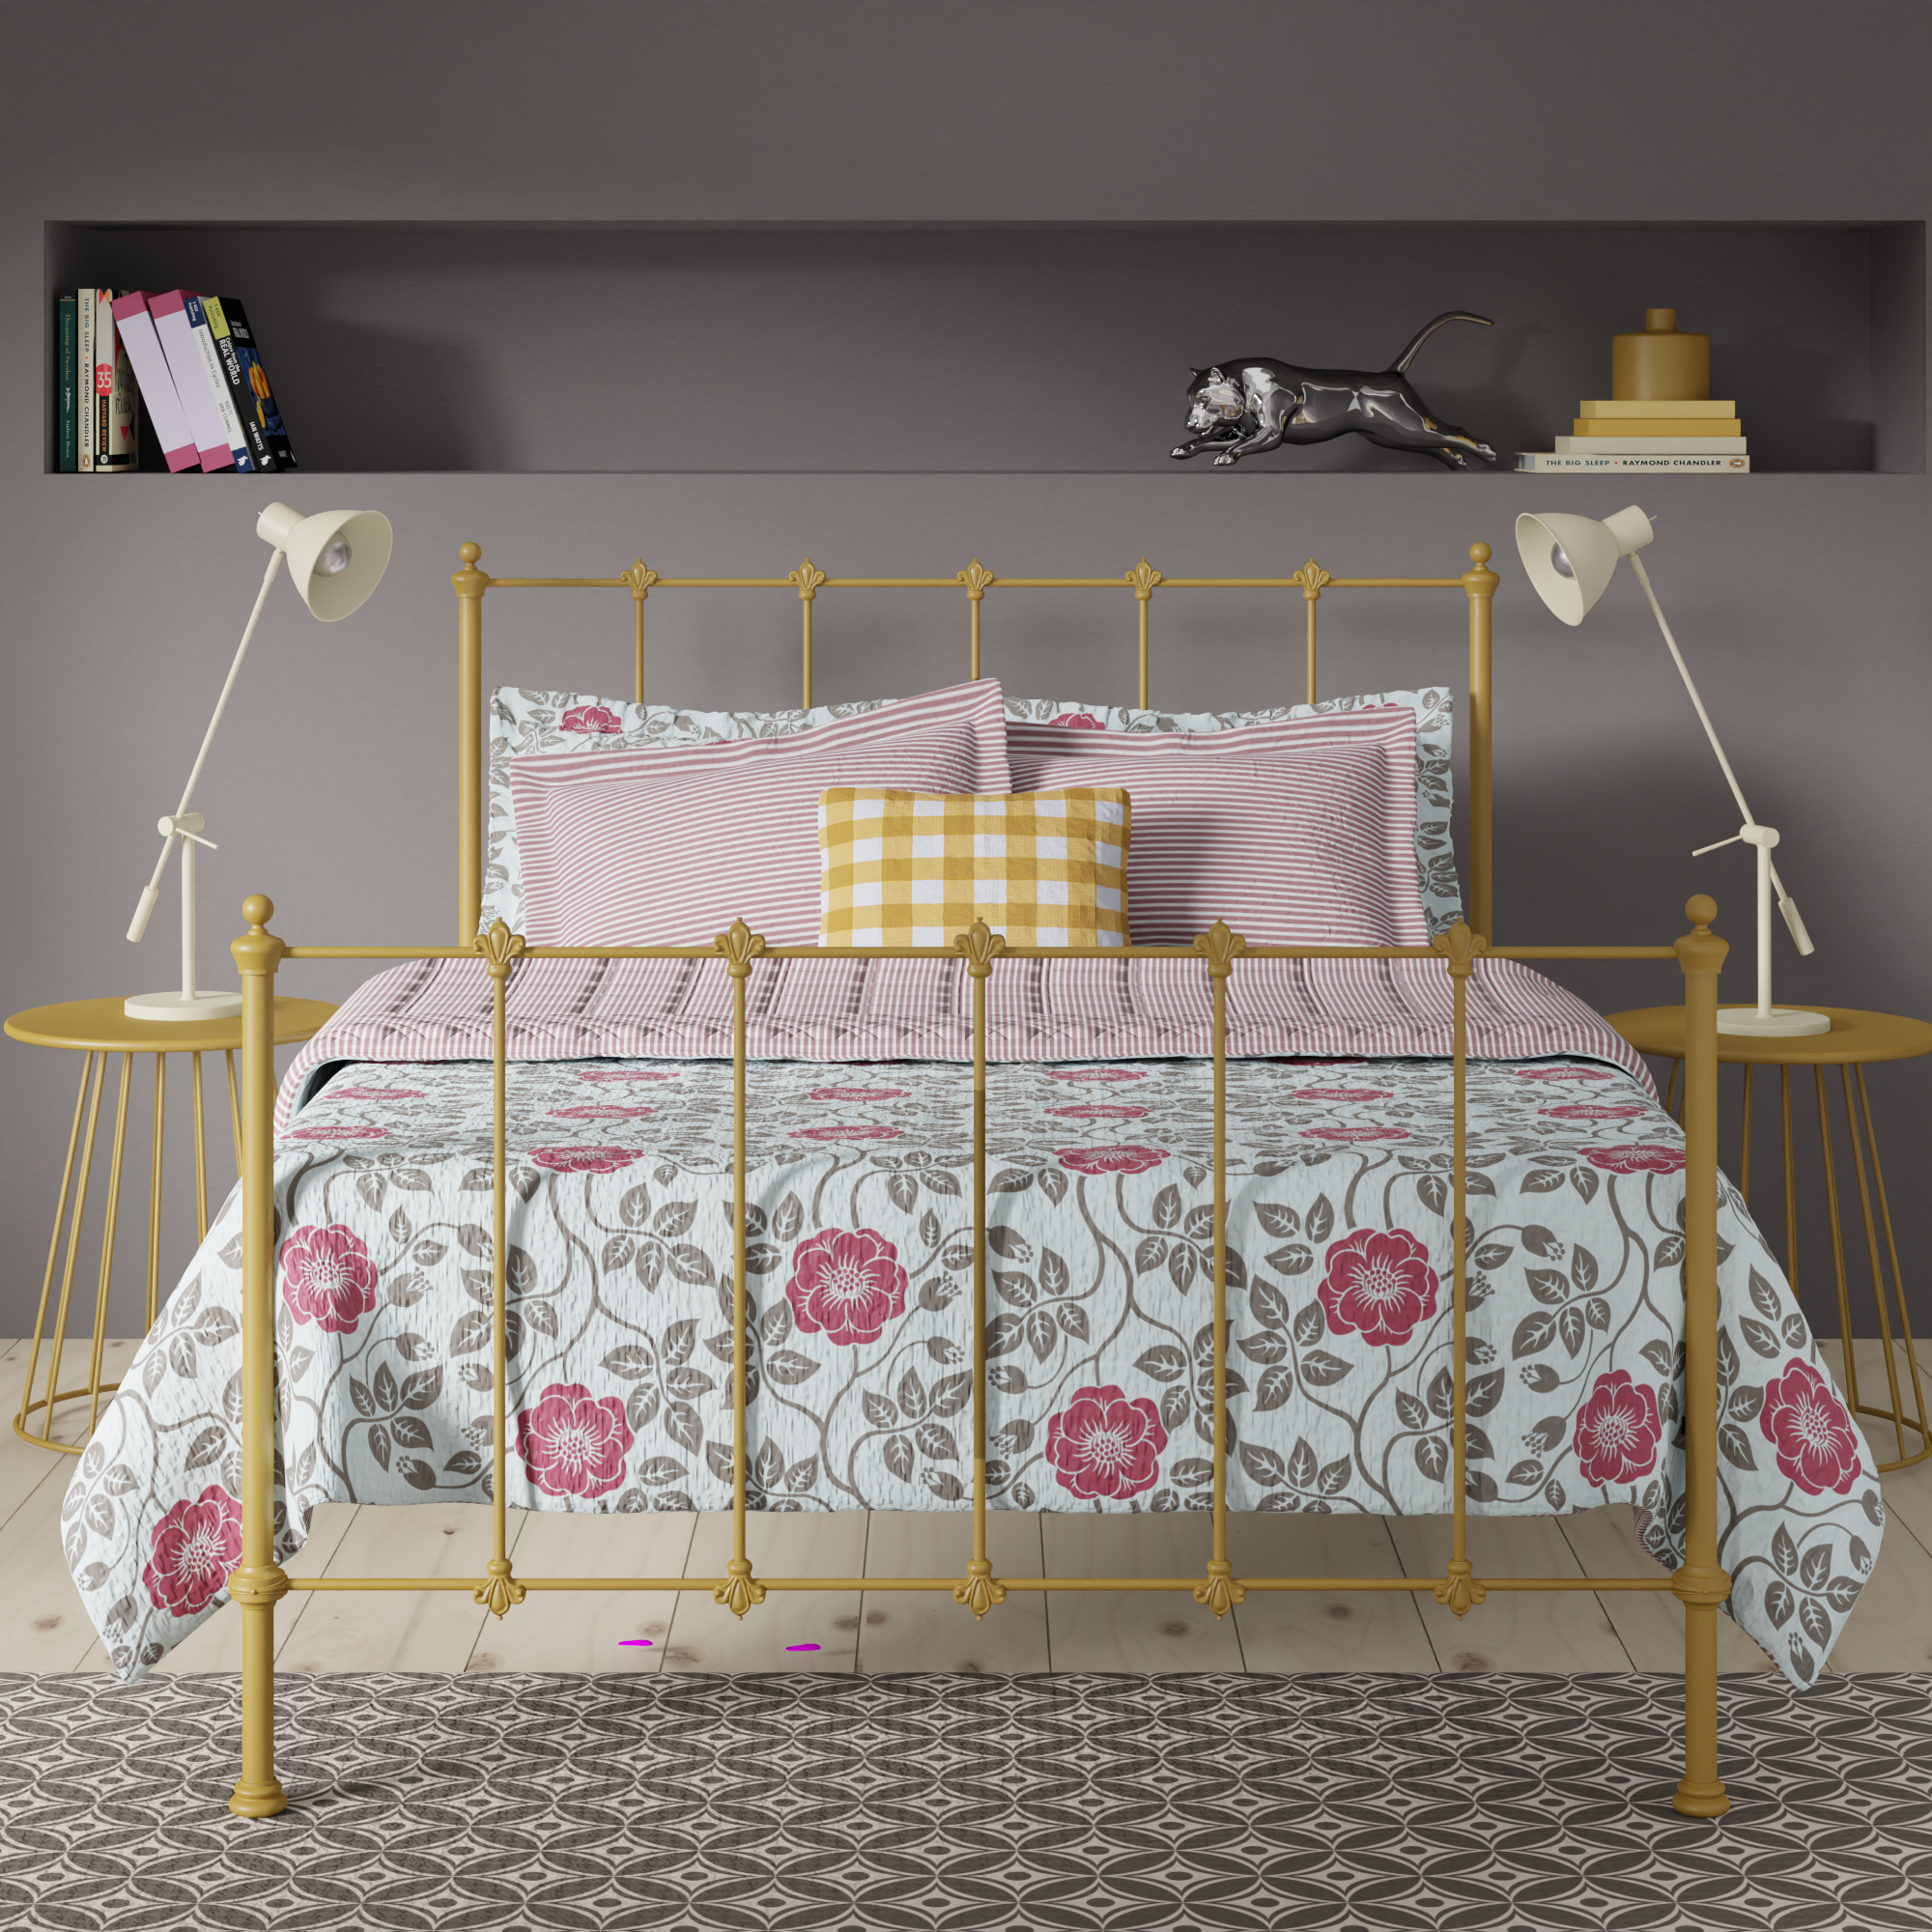 Paris iron bed - Image pink and ochre bedroom